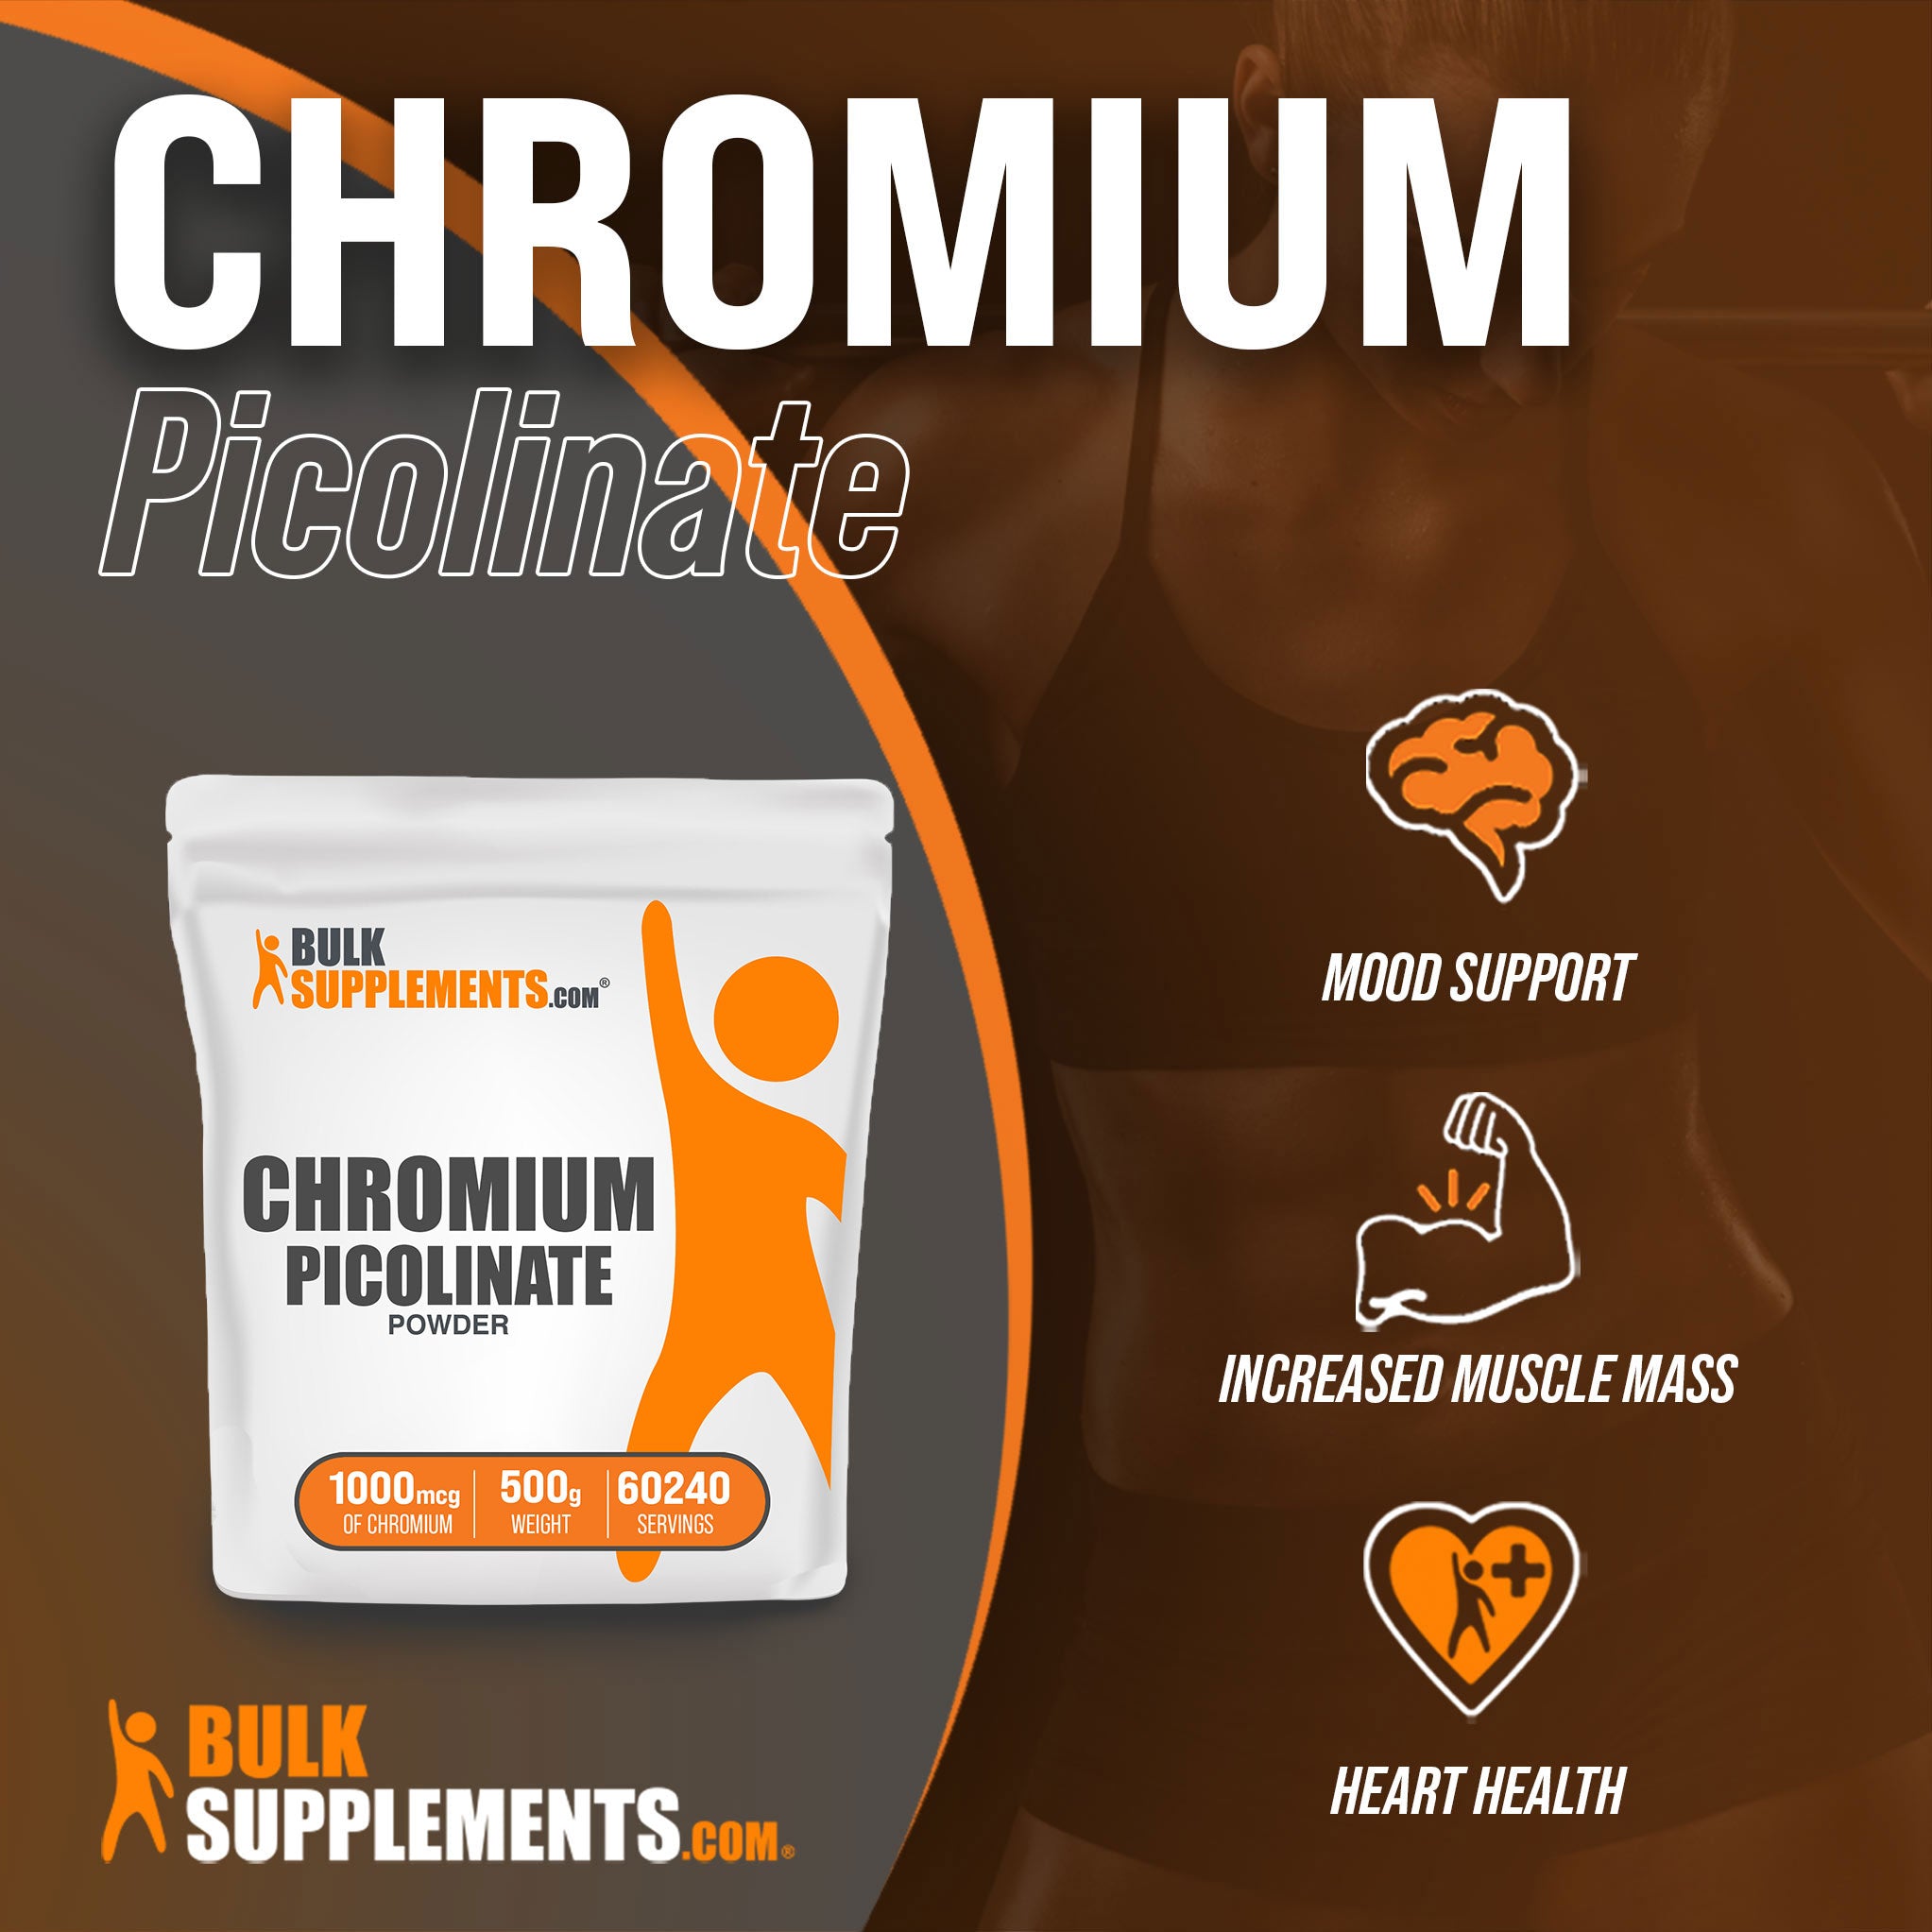 500g of chromium picolinate 1000mcg for weight loss, mood support and more